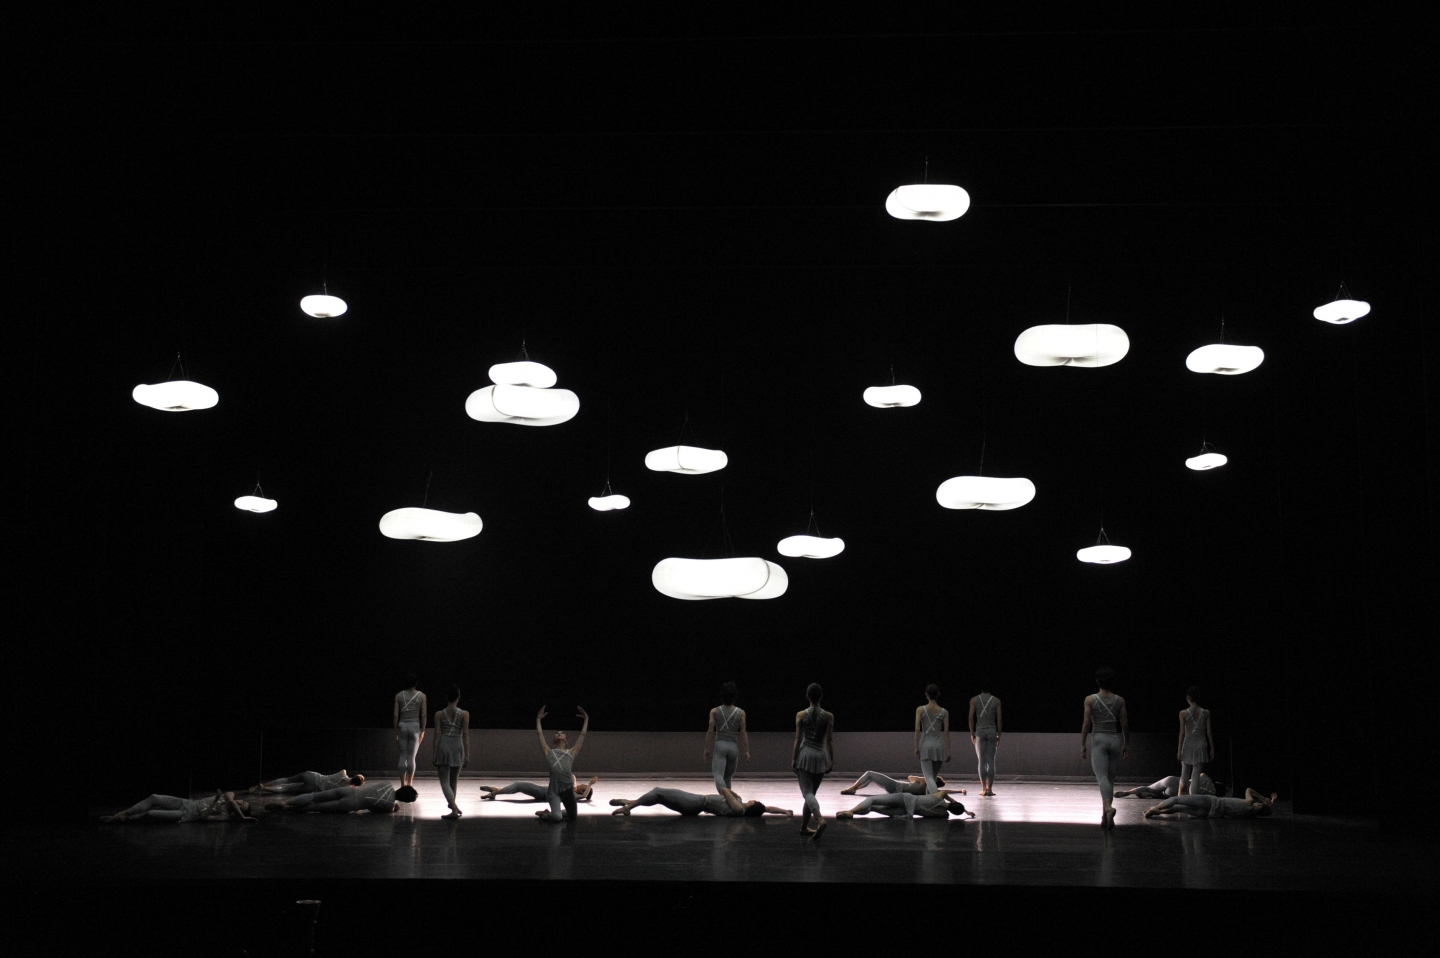 molo cloud pendant lighting for Escaping the Weight of Darkness choreographed by Jessica Lang and performed by the National Ballet of Japan